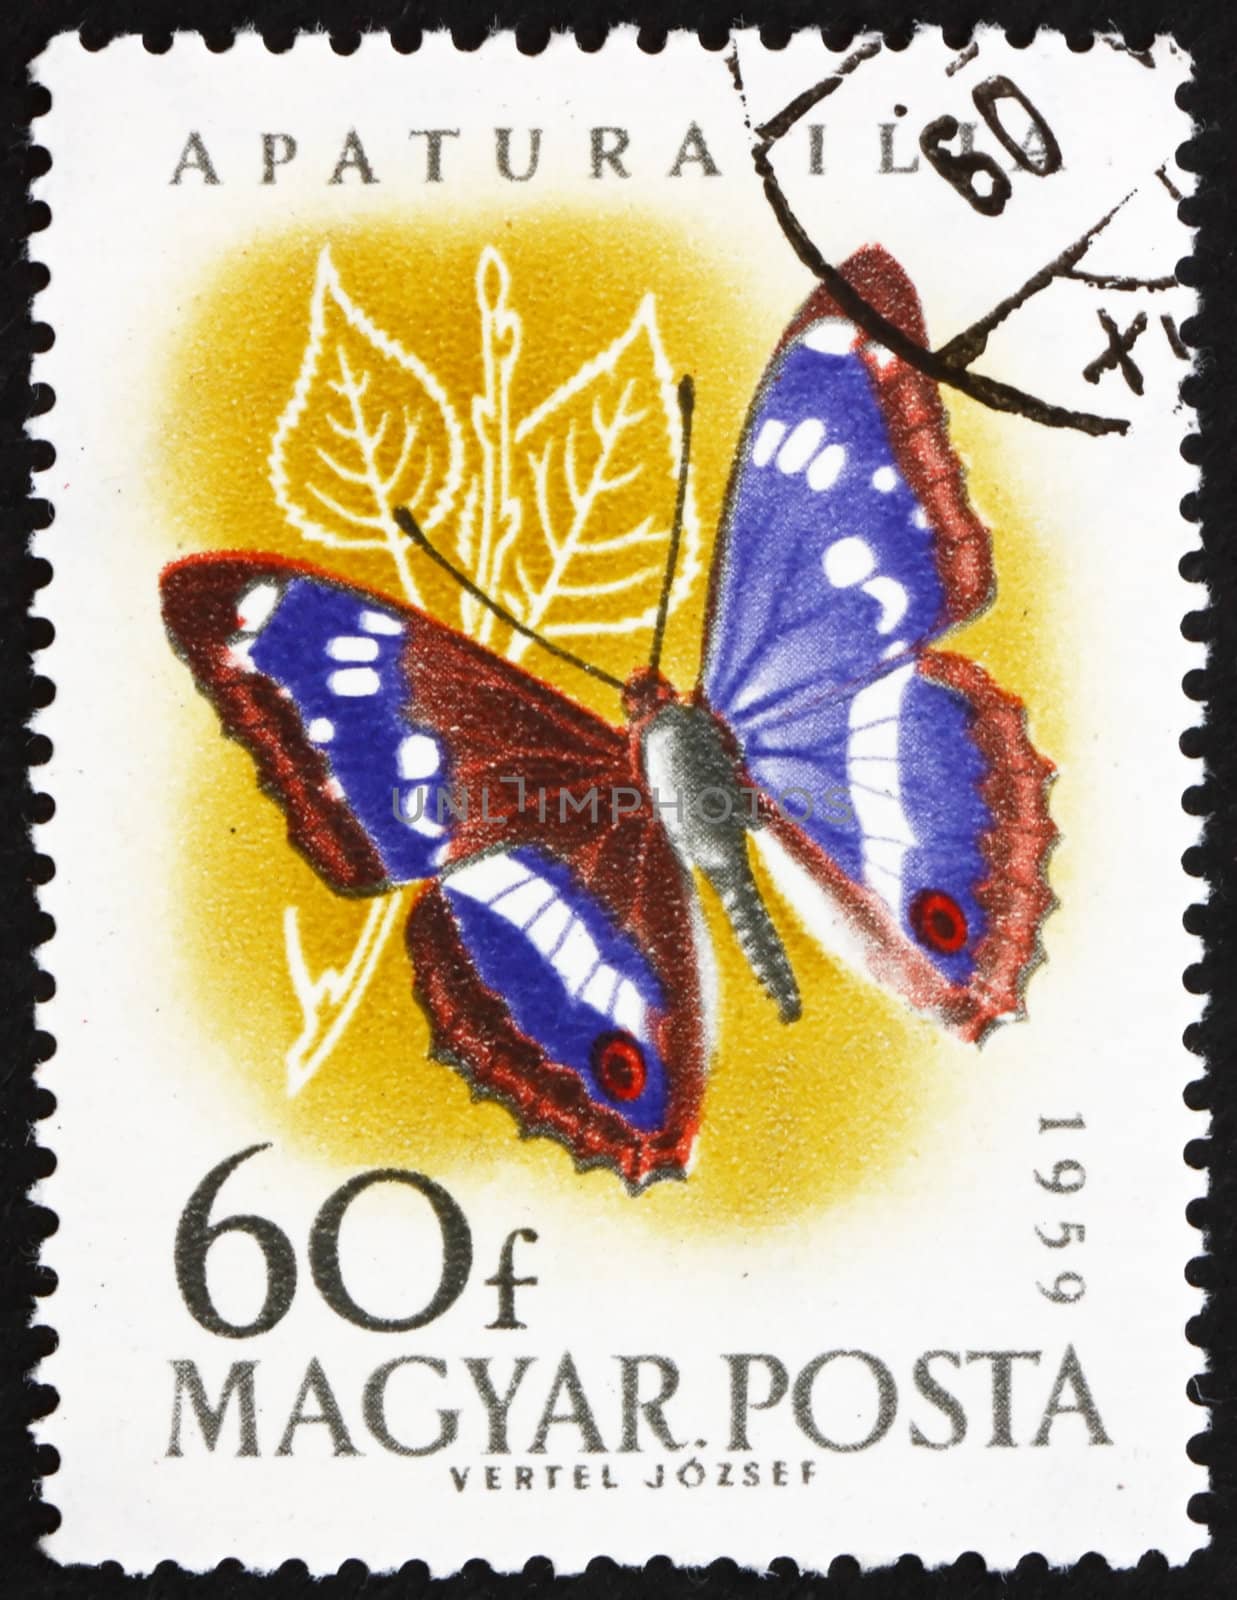 HUNGARY - CIRCA 1959: a stamp printed in the Hungary shows Leser Purple Emperor, Apatura Ilia, Butterfly, circa 1959